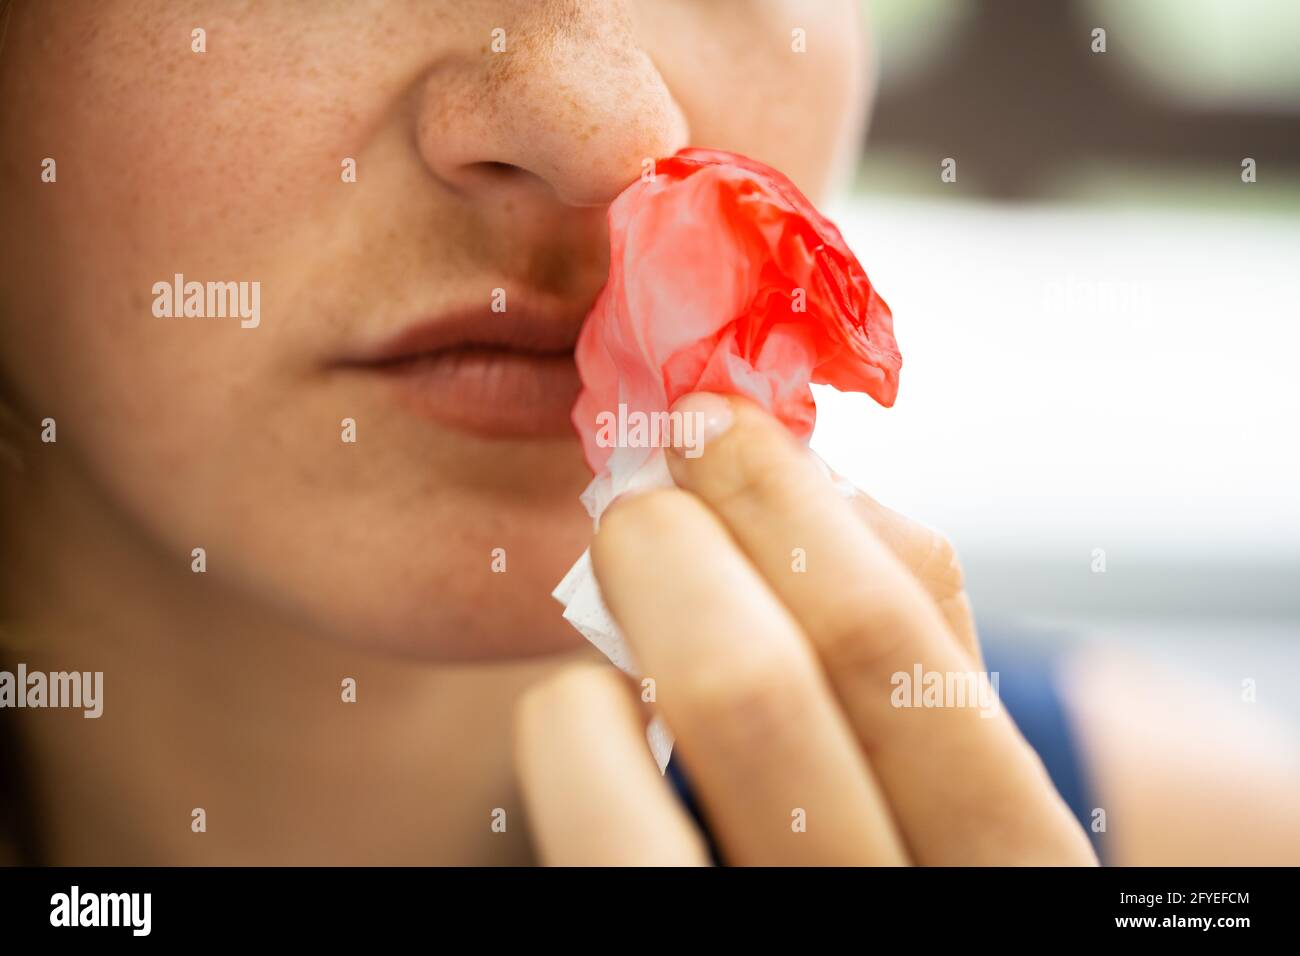 Woman Trying To Stop Blood Bleeding From Nose Stock Photo